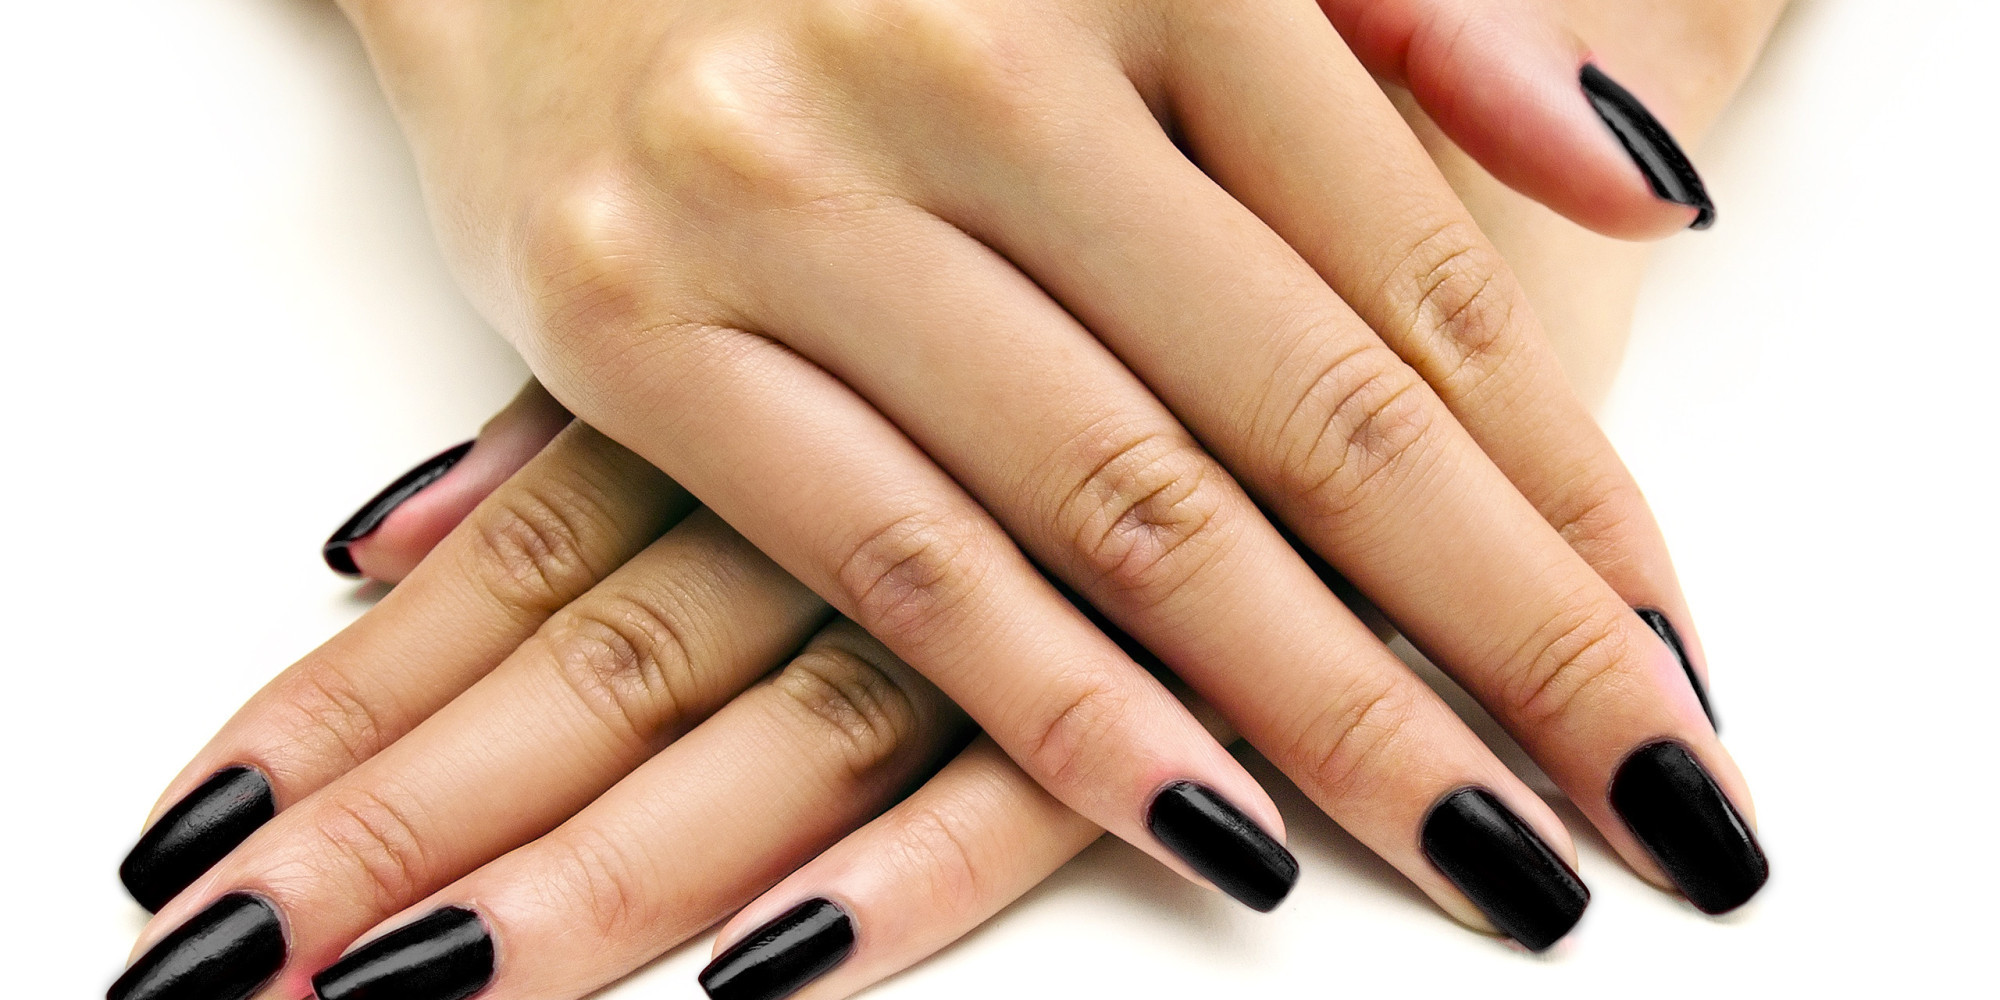 Nail Colors For Dark Hands
 7 New Dark Nail Colors To Try This Fall